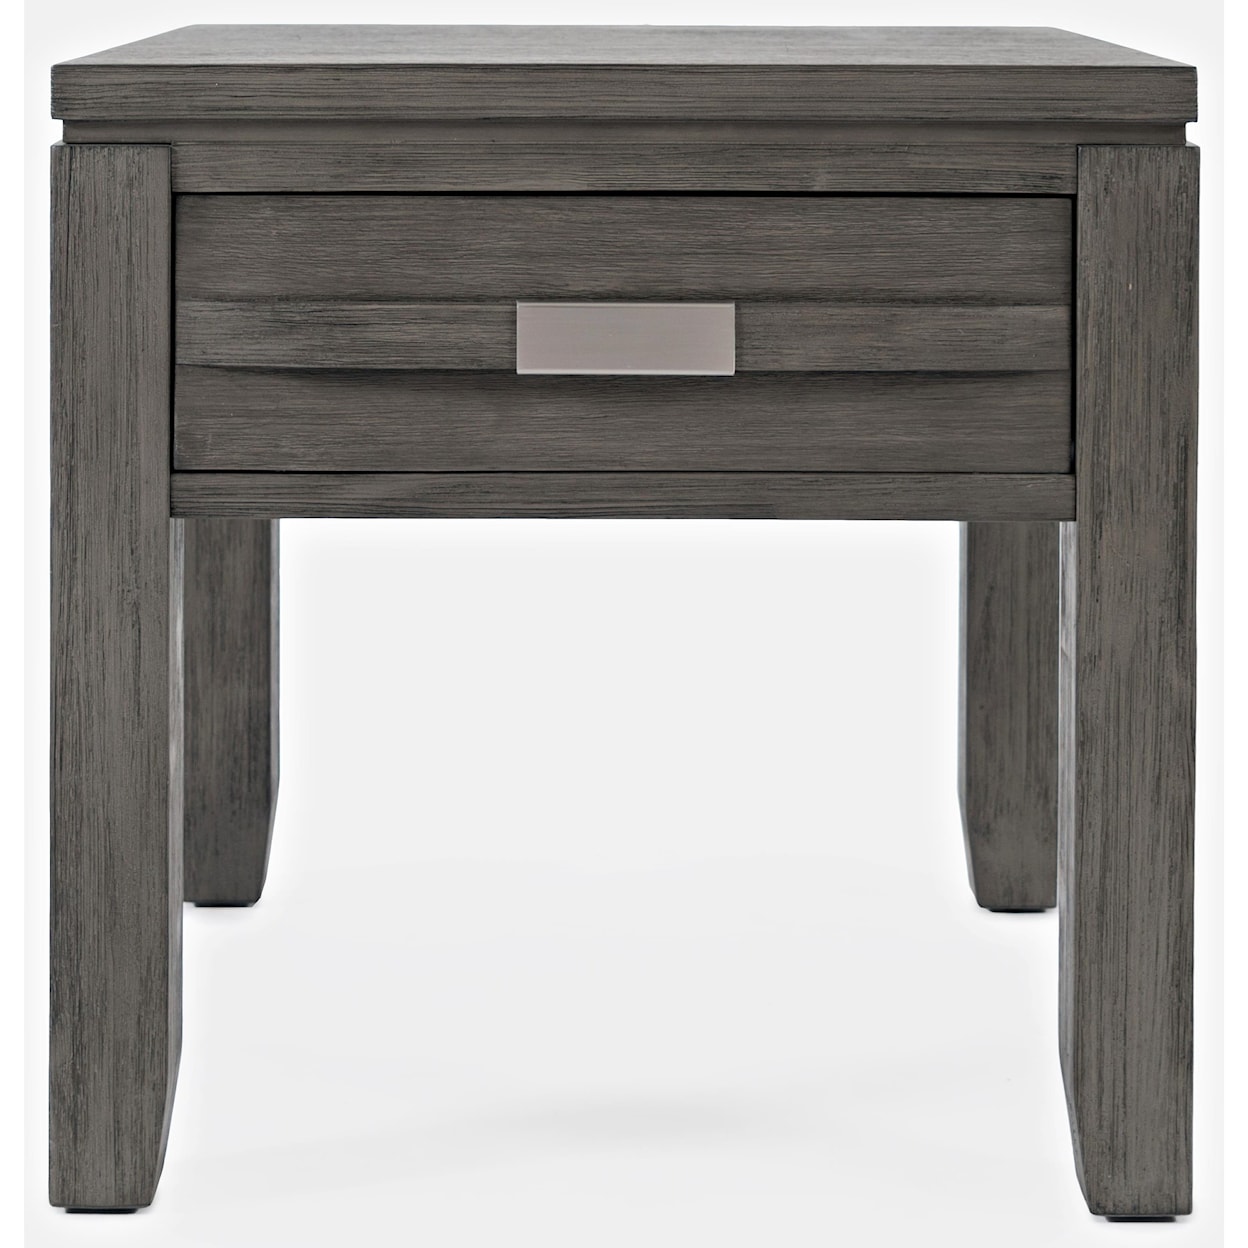 Jofran Altamonte - 1850 End Table with Drawer